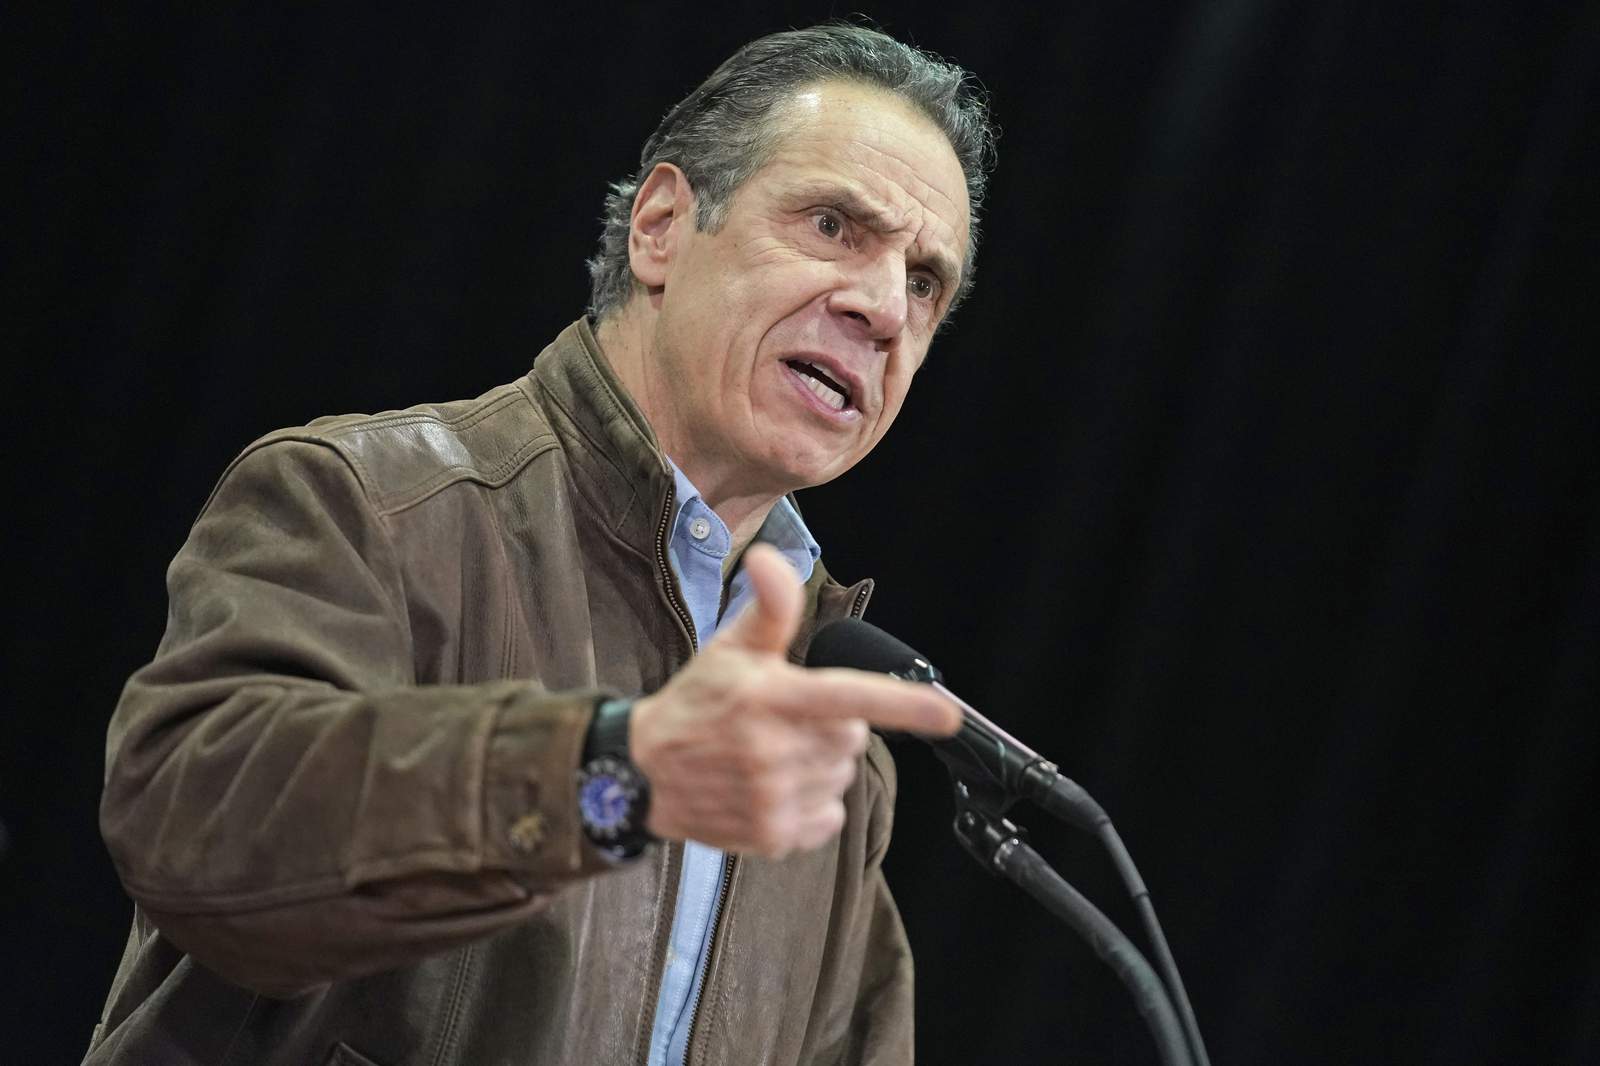 Calls grow for Cuomo harassment inquiry. But by whom?